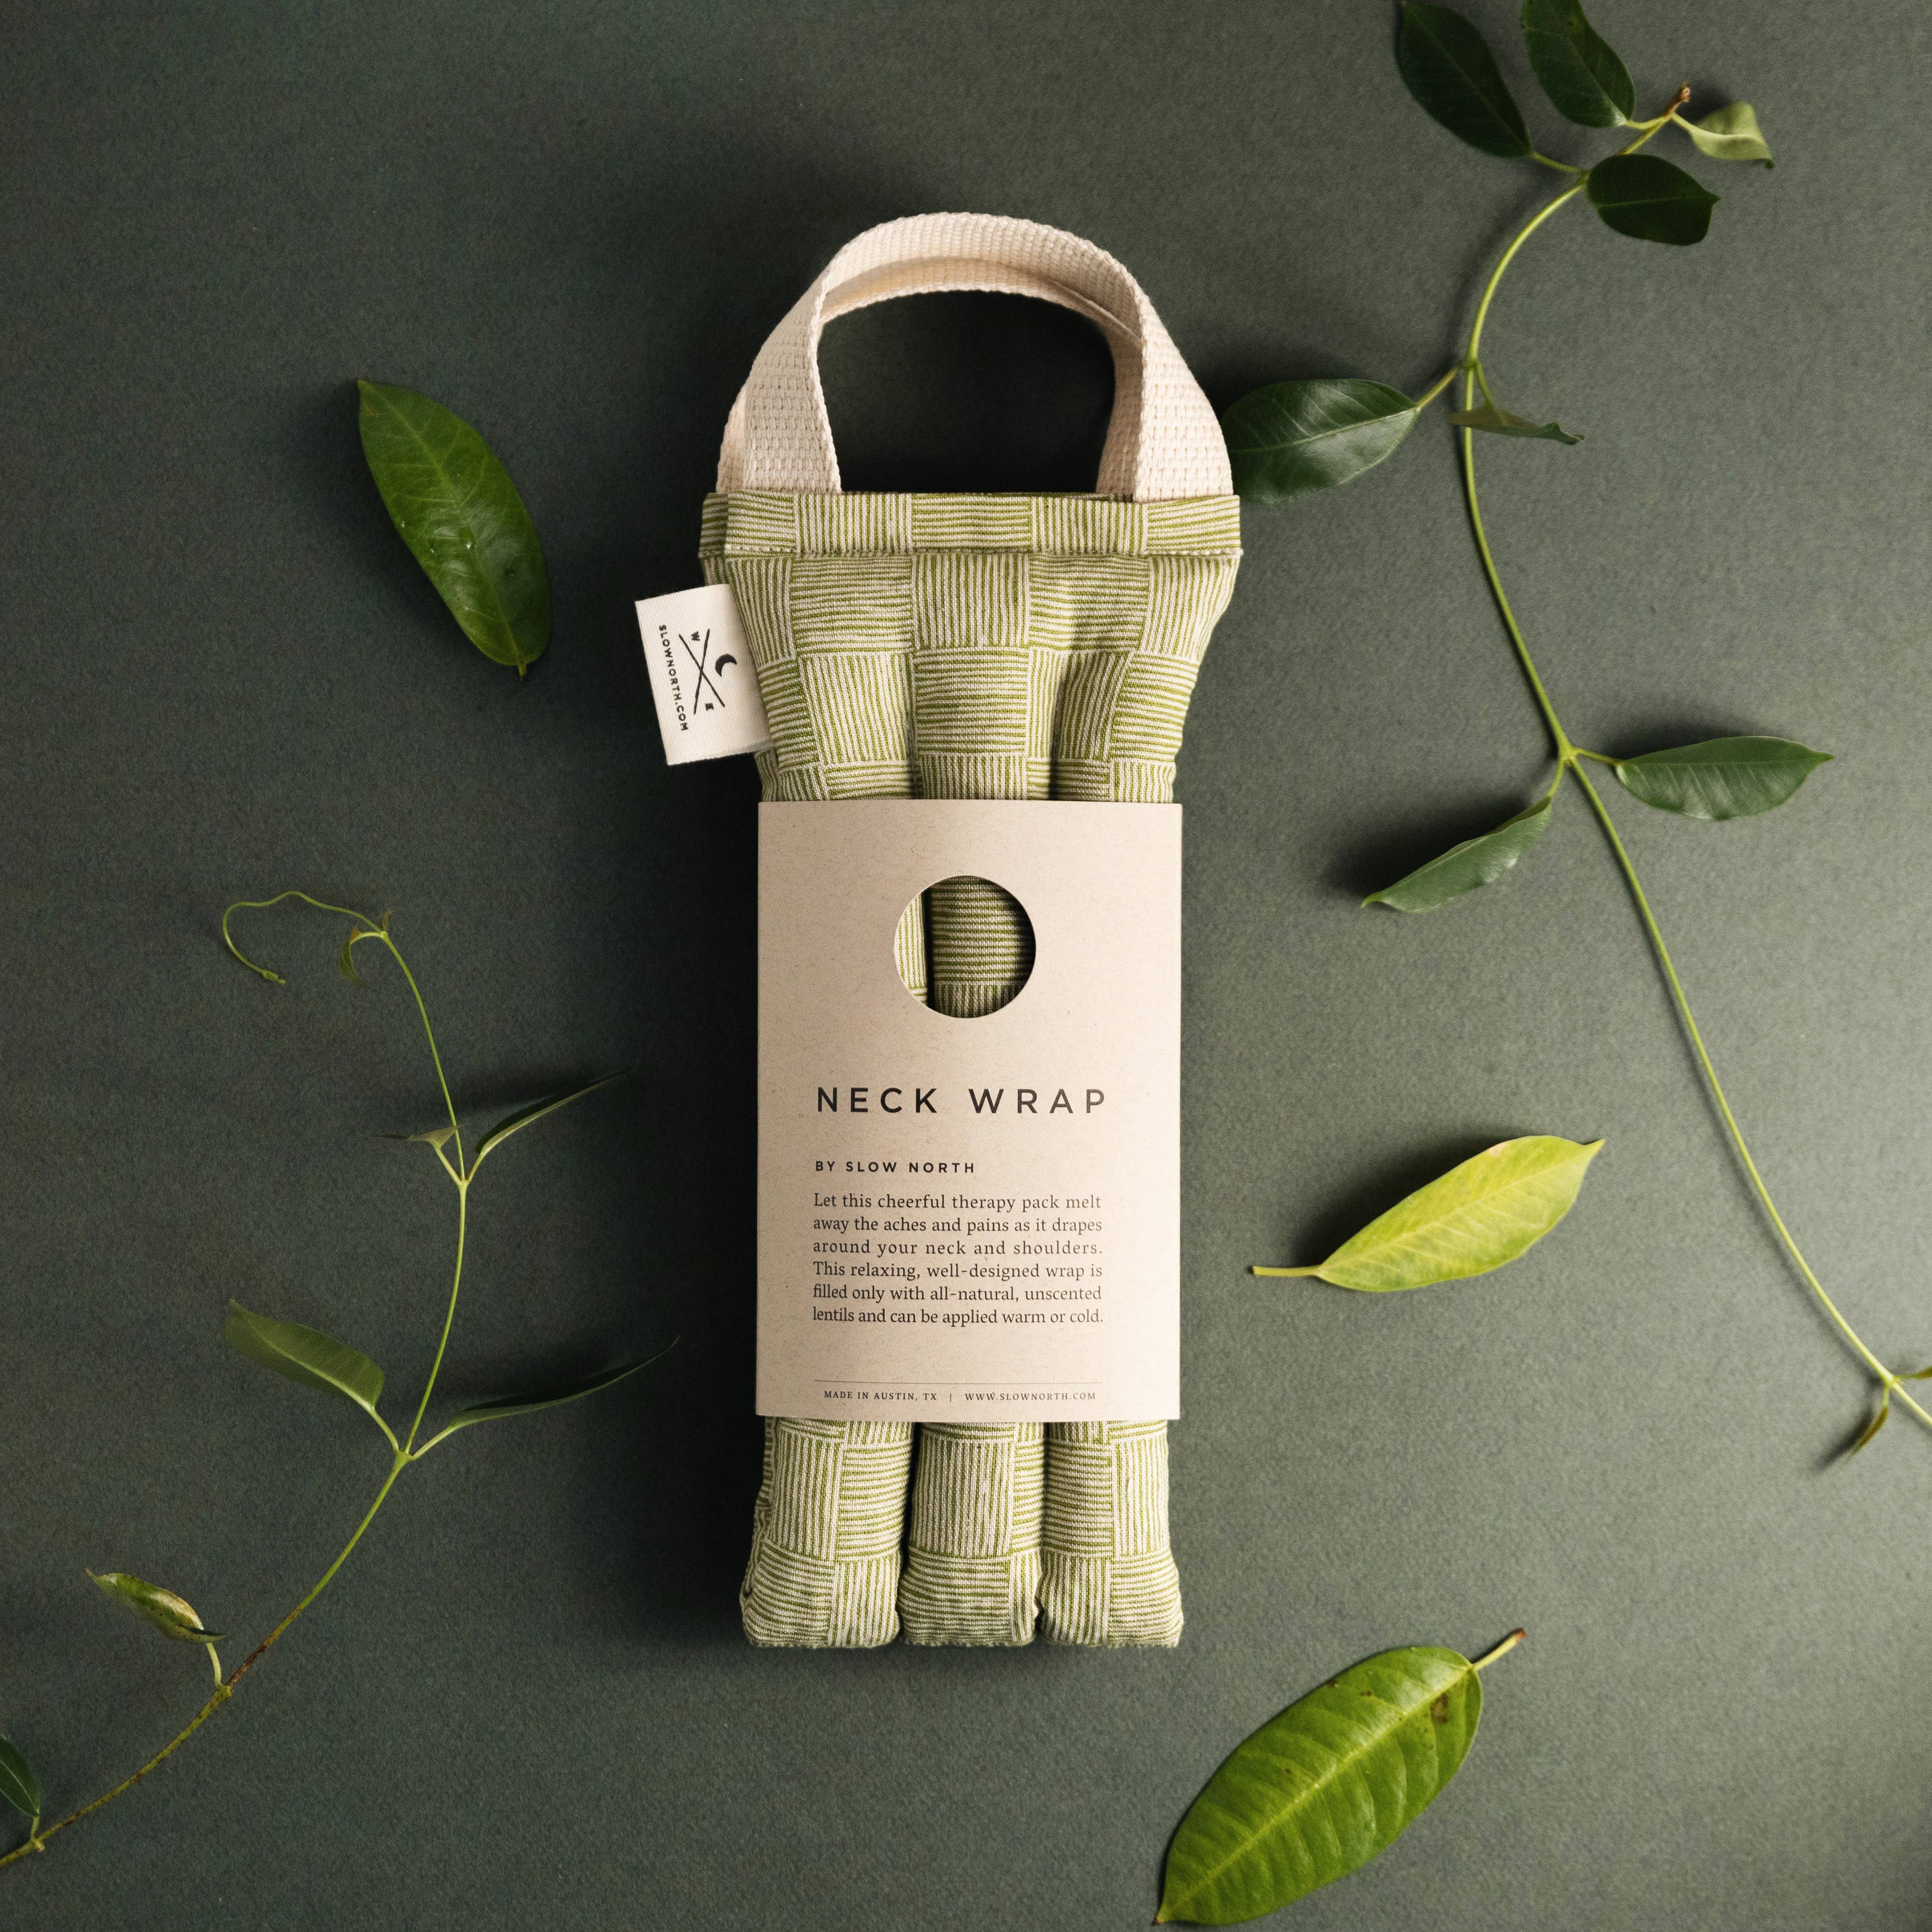 Slow North - Neck Wrap Therapy Pack - Greenhouse